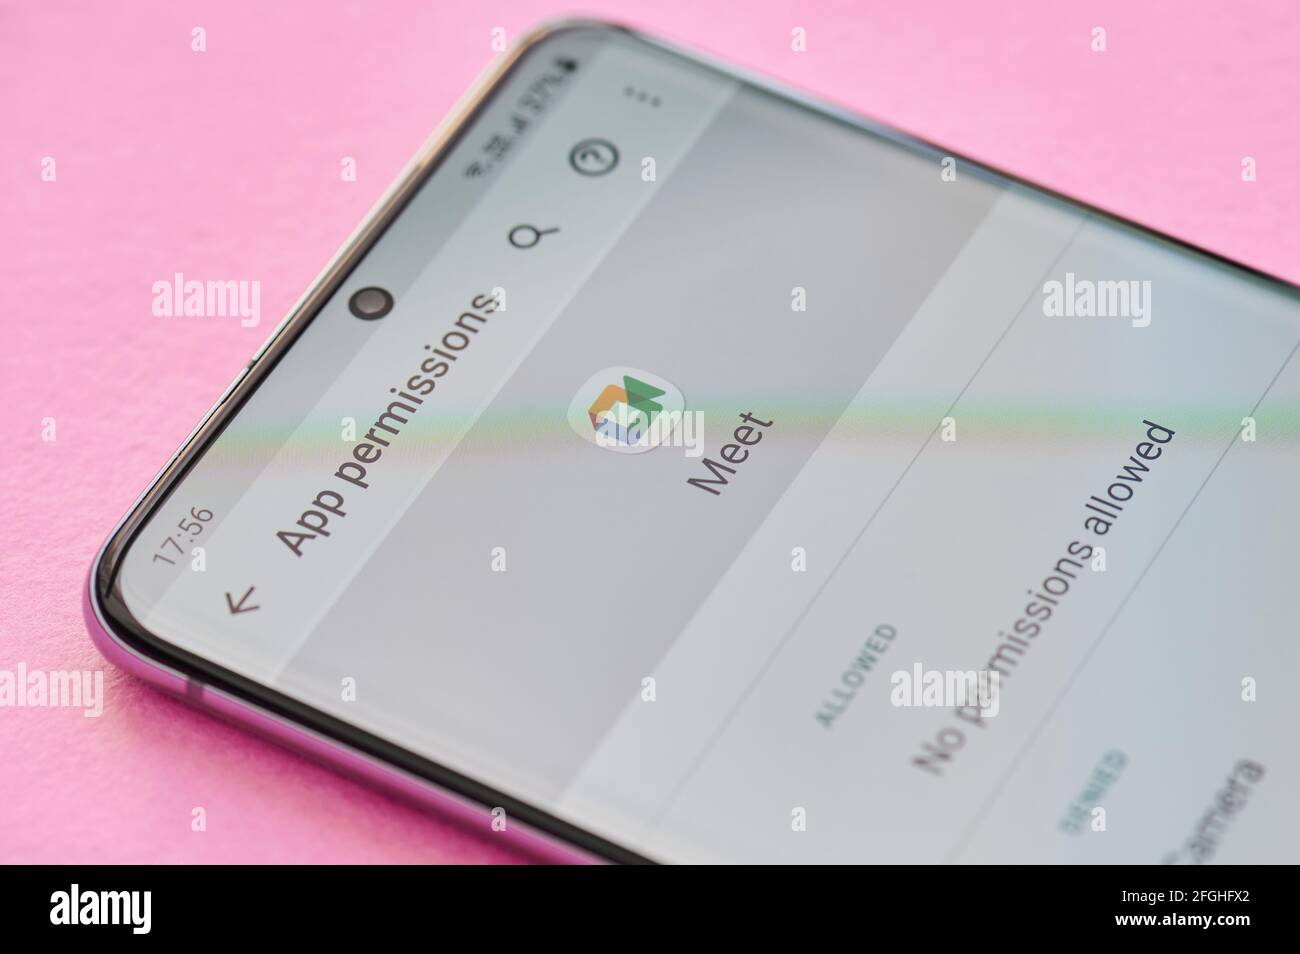 New york, USA - April 23, 2021: Changing permissions setting of google meet app on smartphone screen macro close up view Stock Photo